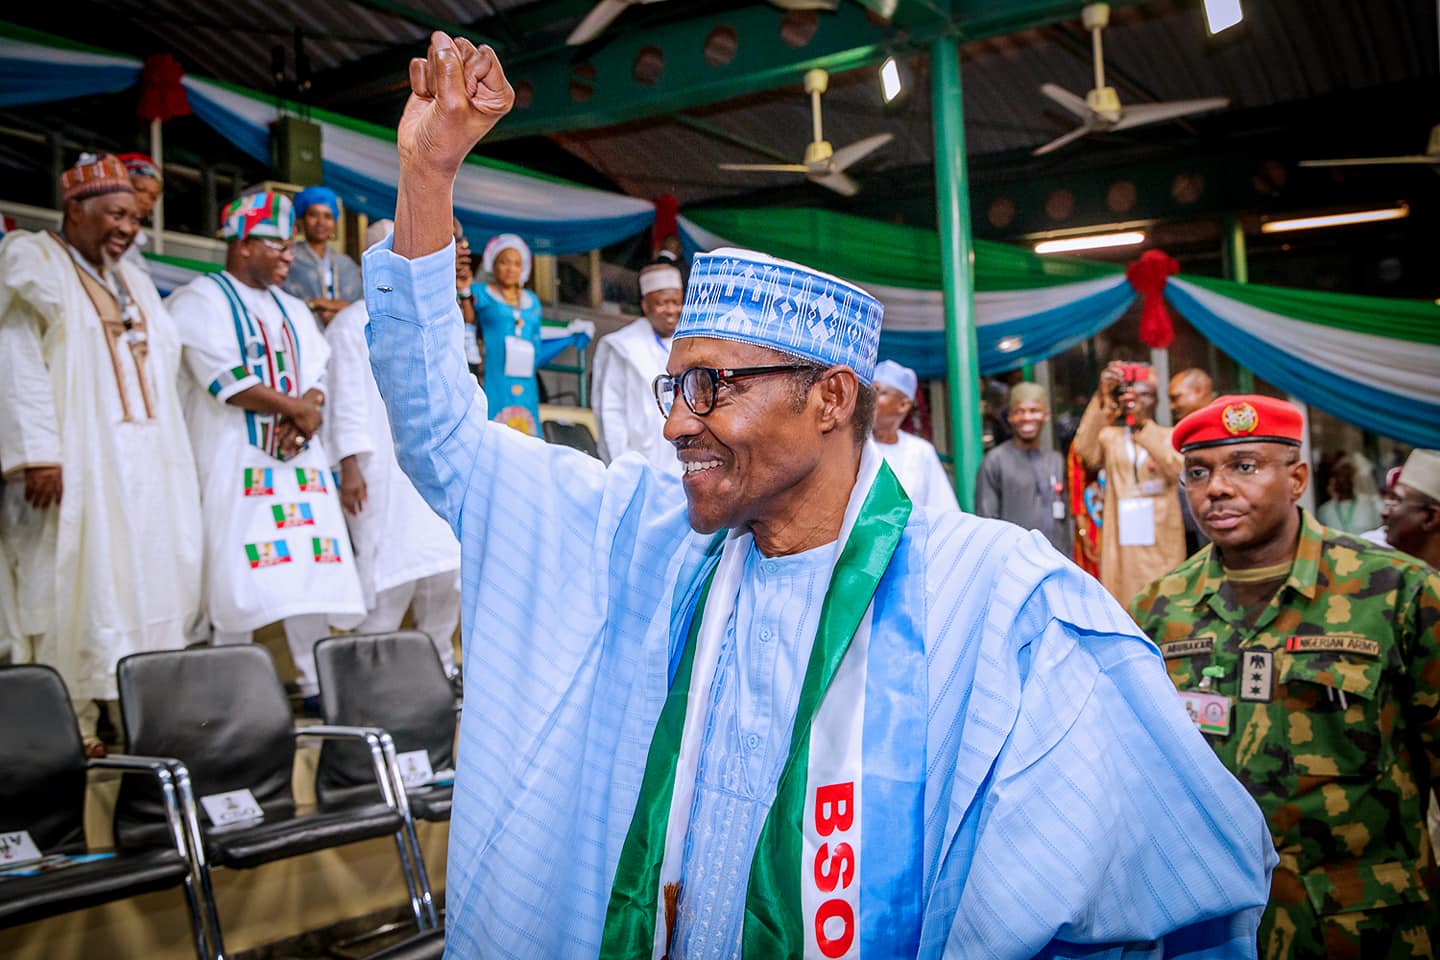 President Buhari attends APC Presidential National Convention at Eagles Square, Abuja on 6th Oct 2018